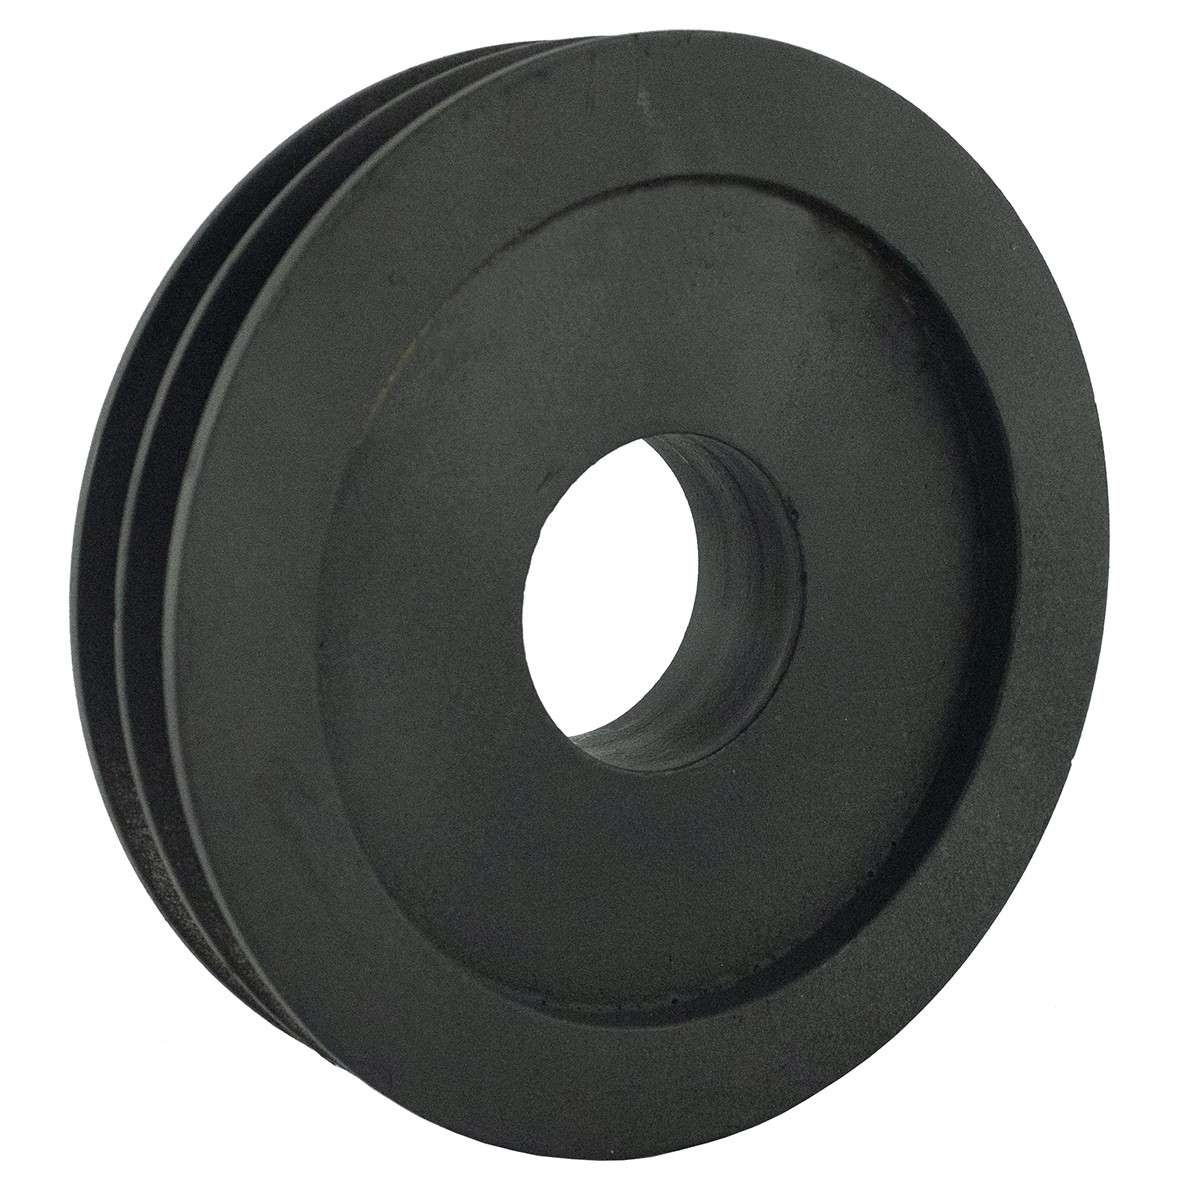 Pulley 155 x 47 x 35 mm, 2 A13 belts for flail mower